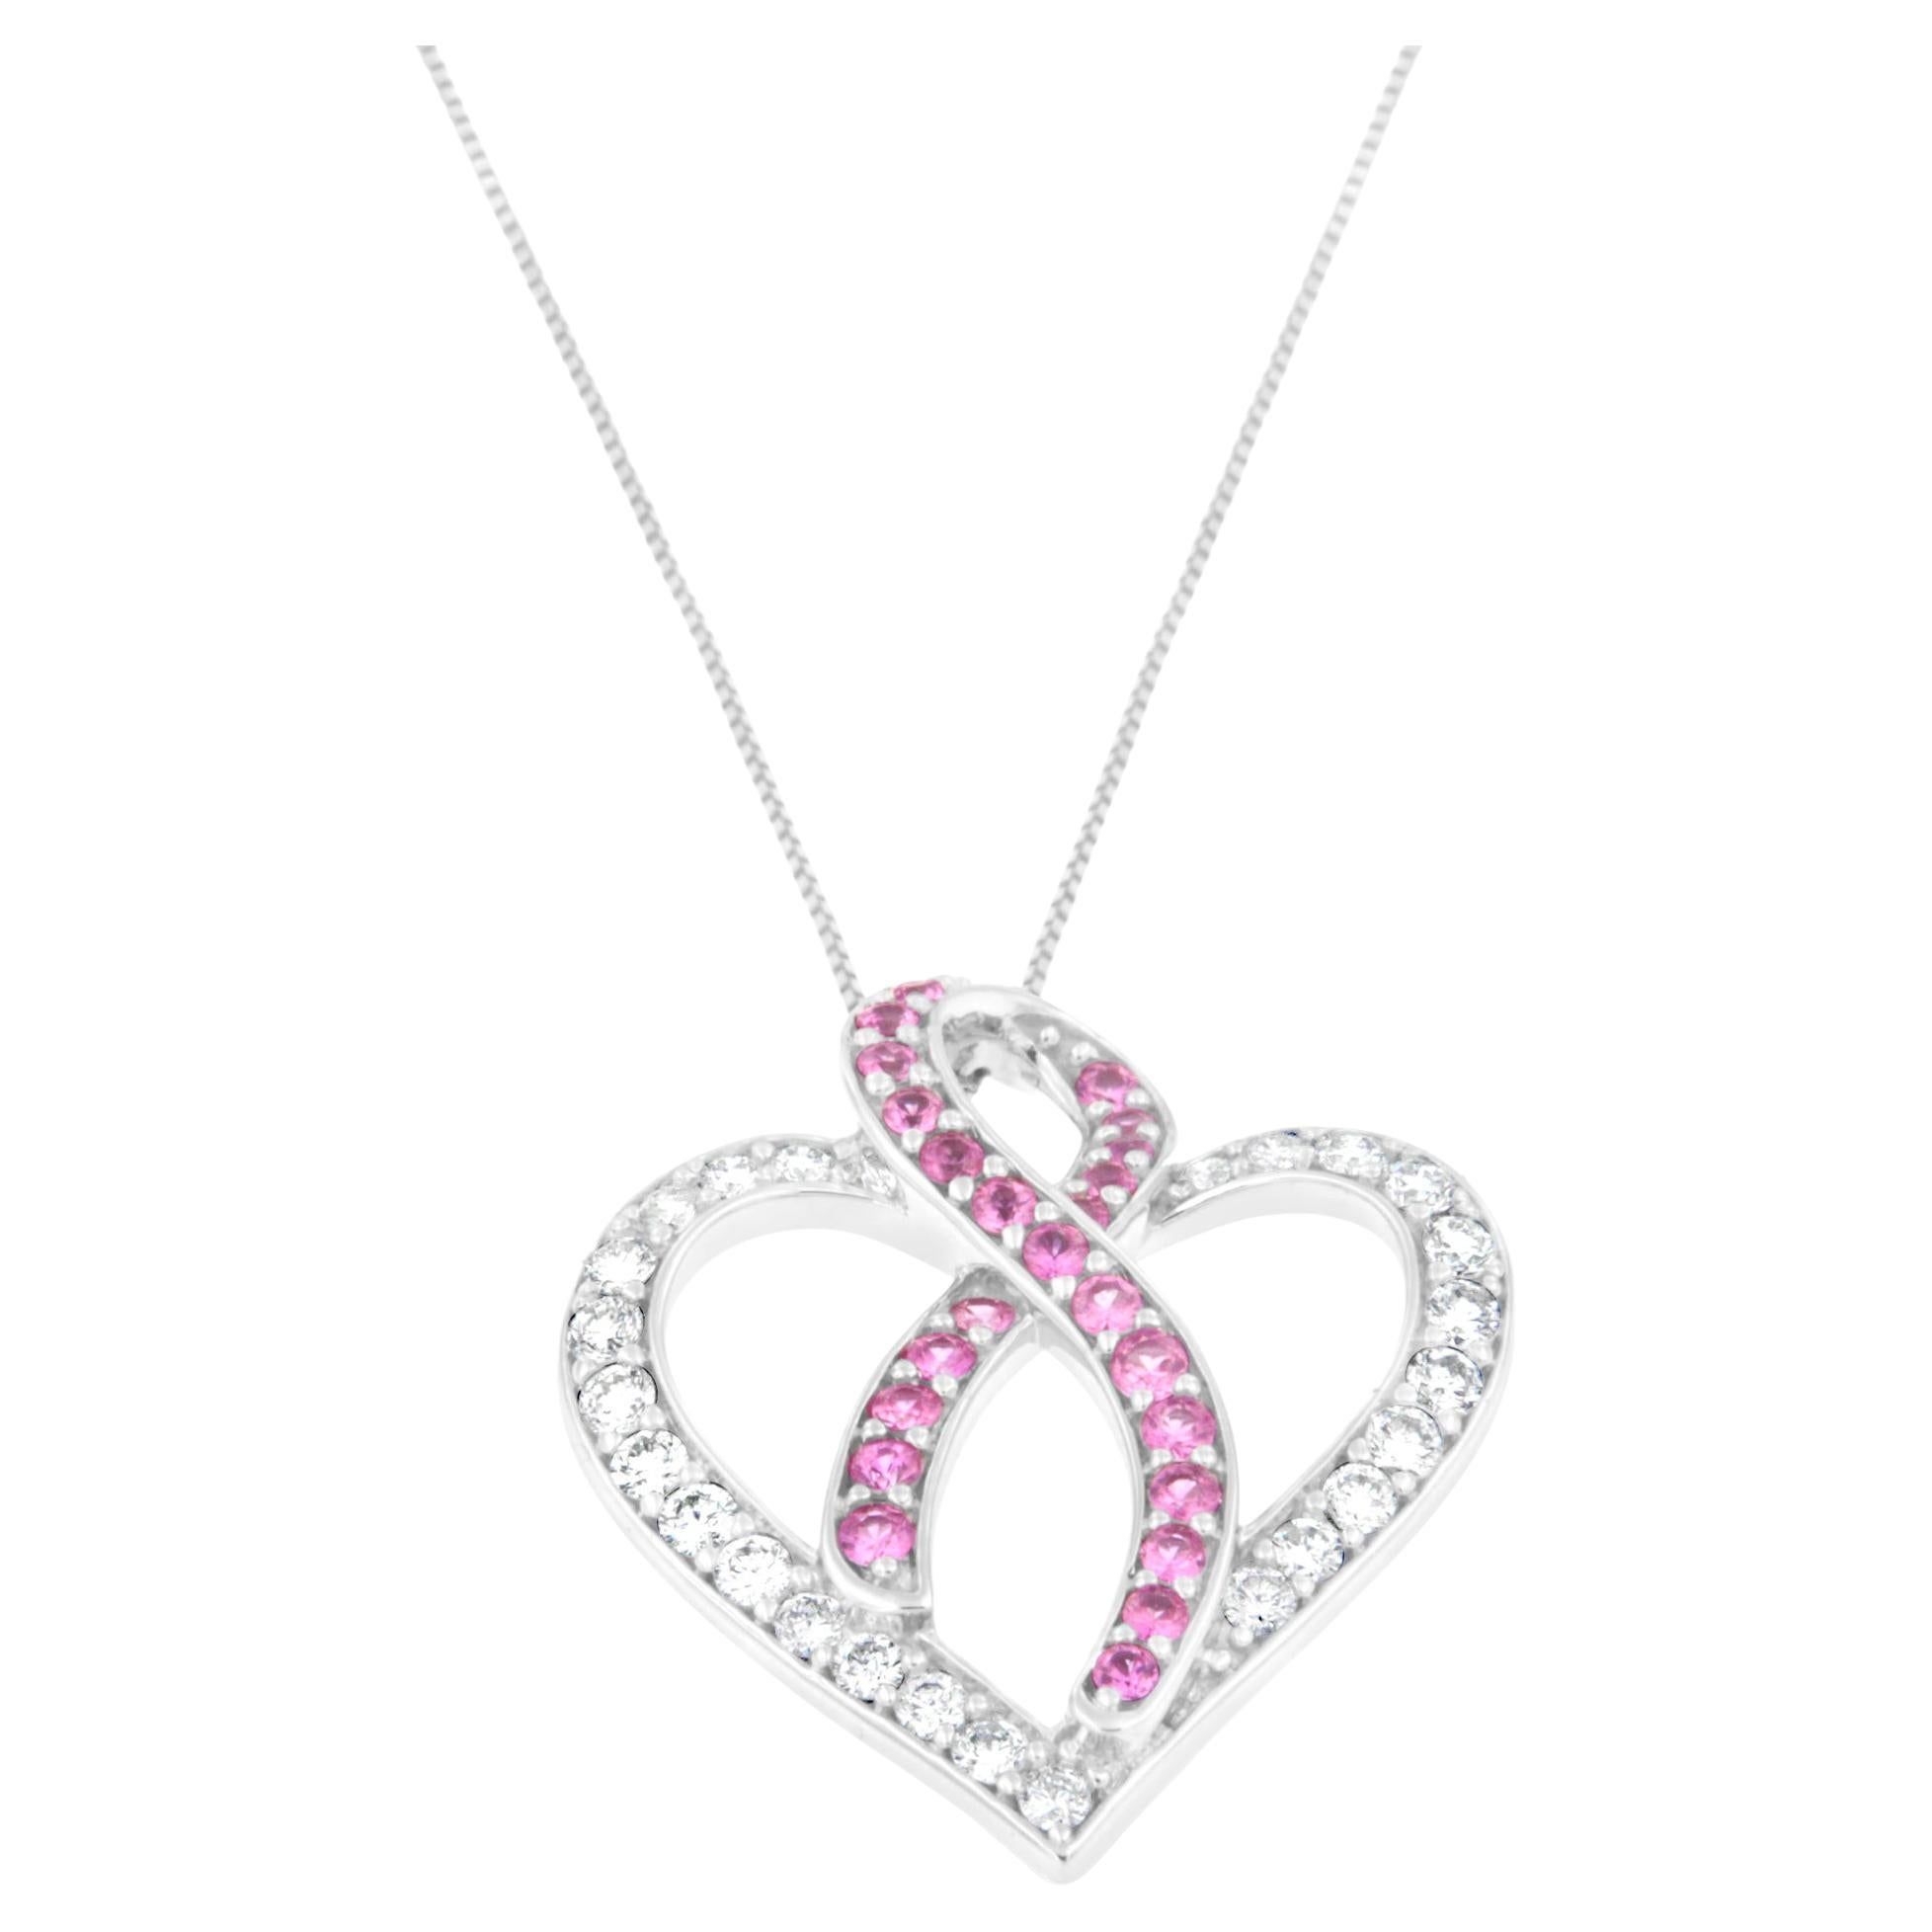 14K White Gold 1/2 Carat Diamond and Pink Sapphire Gemstone Pendant Necklace For Sale